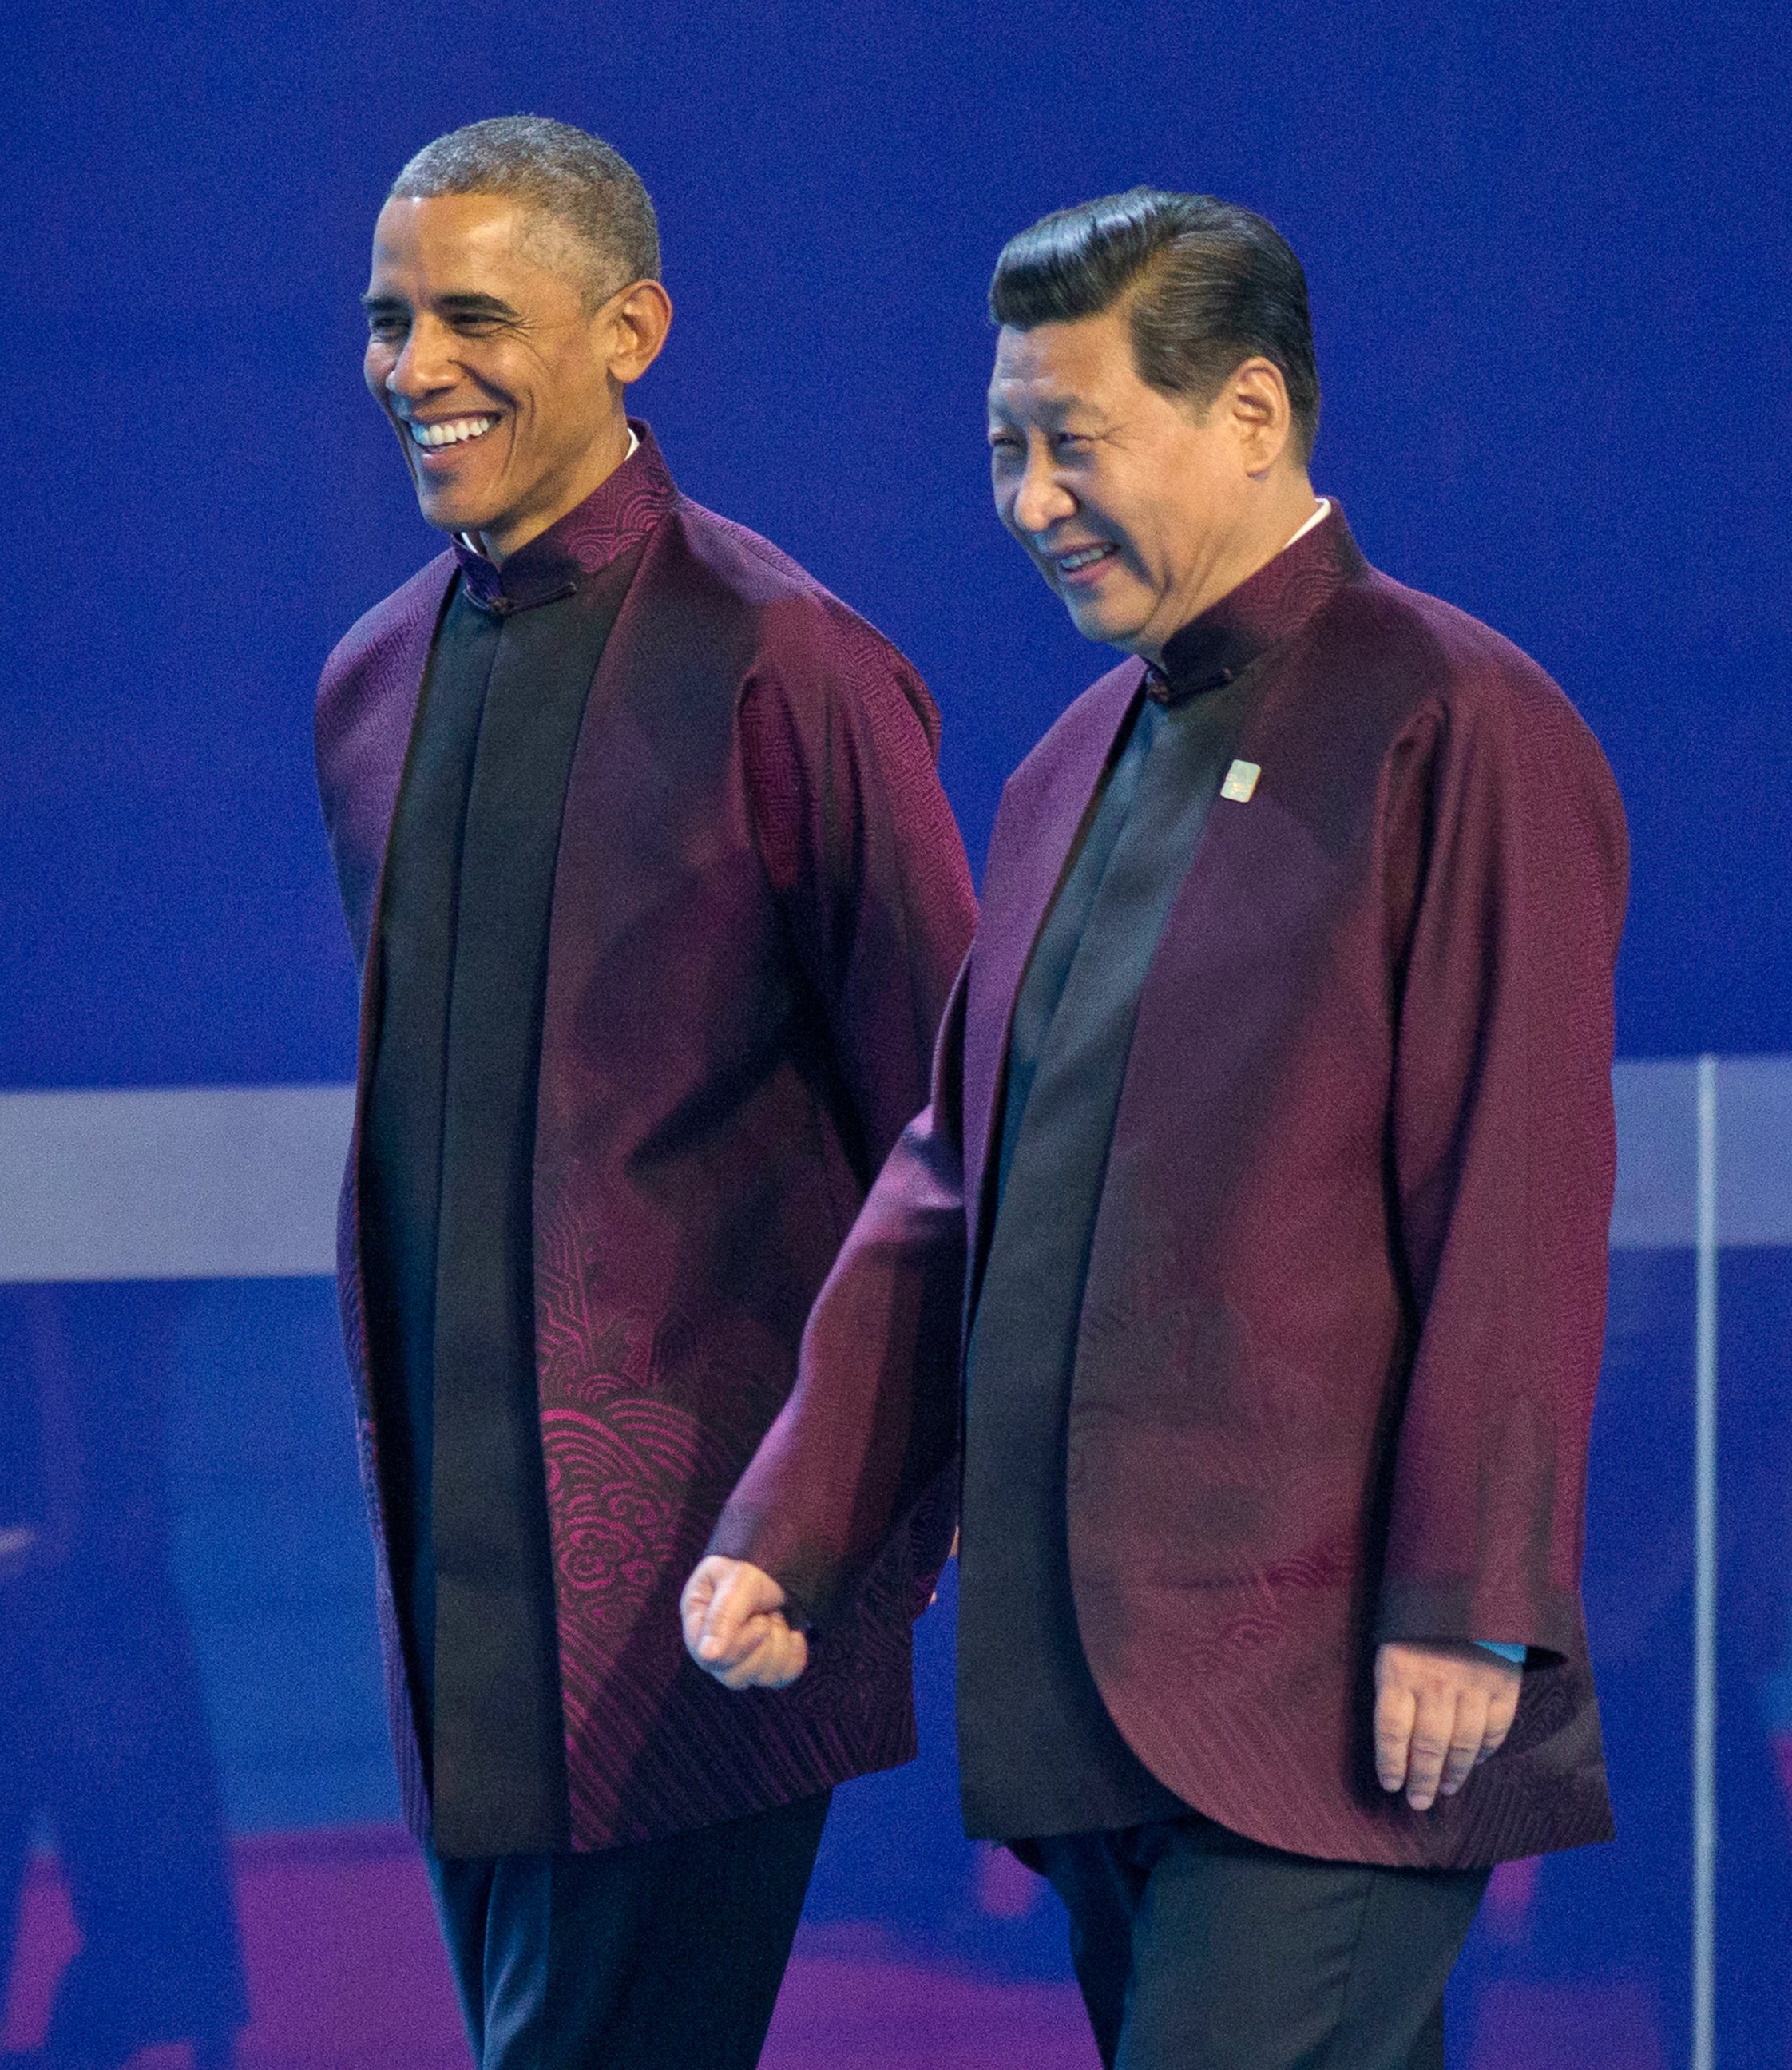 PHOTO: U.S. President Barack Obama, left, and Chinese President Xi Jinping walk during the Asia-Pacific Economic Cooperation (APEC) Summit family photo, Nov. 10, 2014 in Beijing.